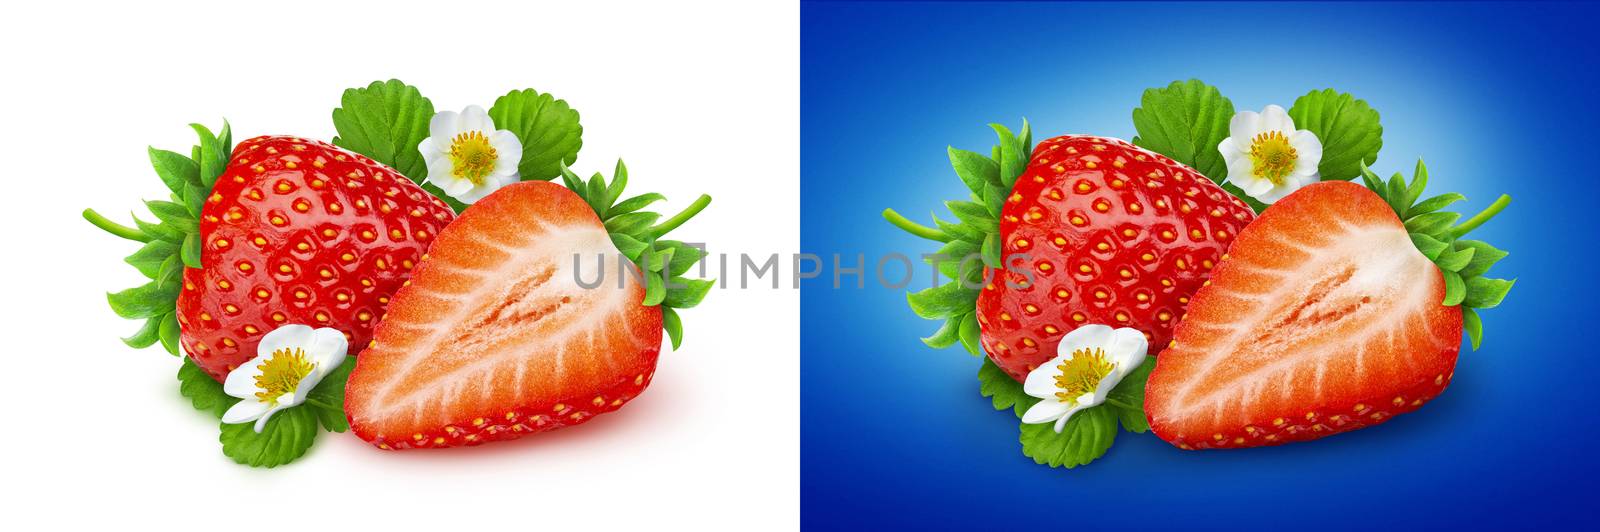 Strawberry isolated. Two strawberries with flowers and leaves isolated on white background by xamtiw